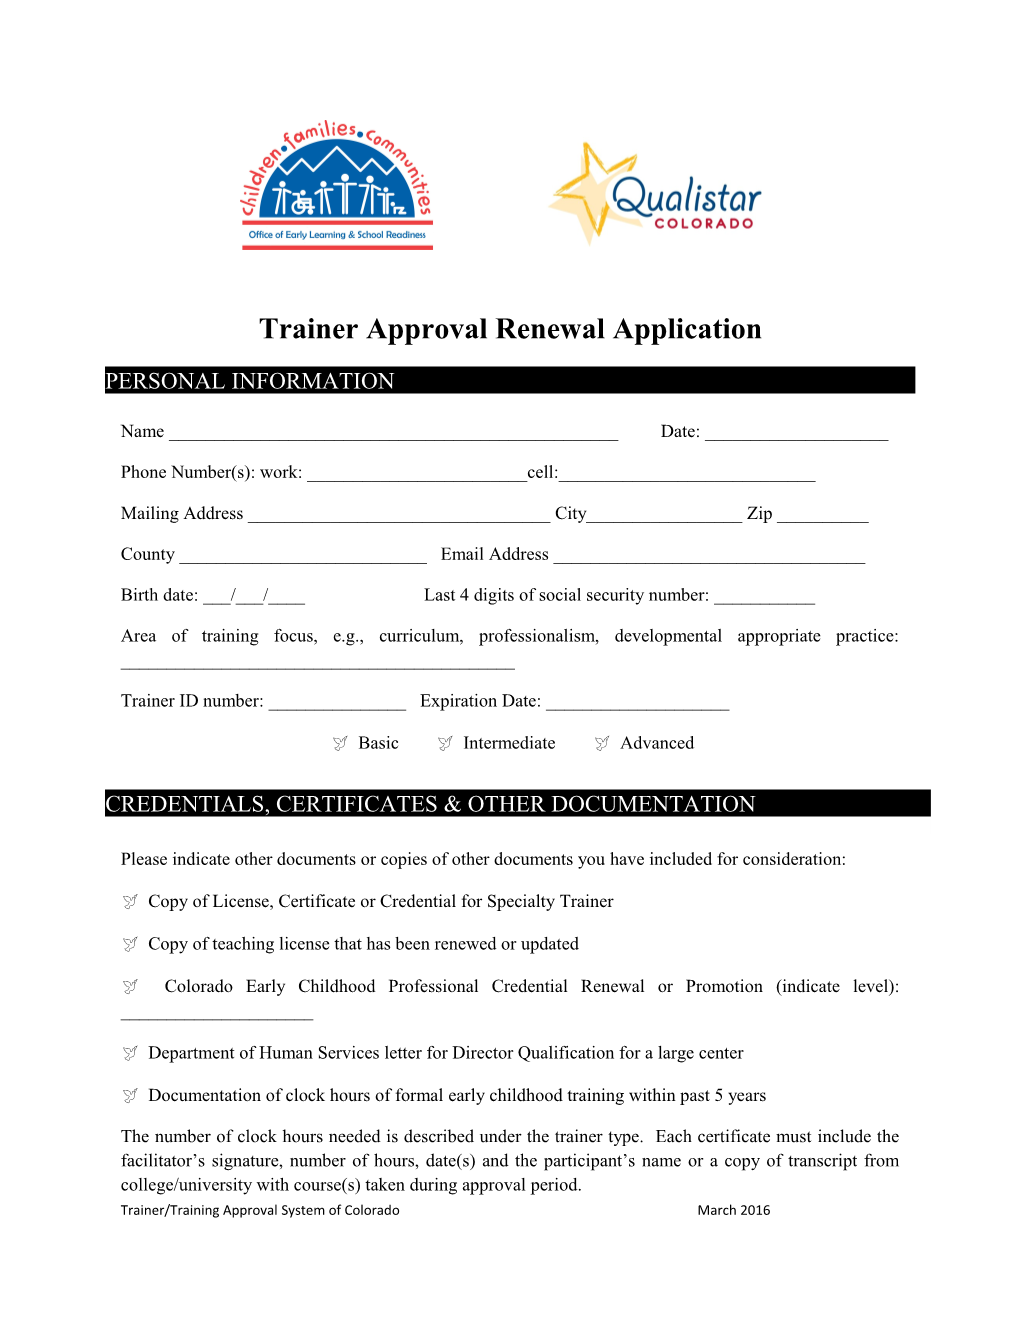 Trainer Approval Renewal Application